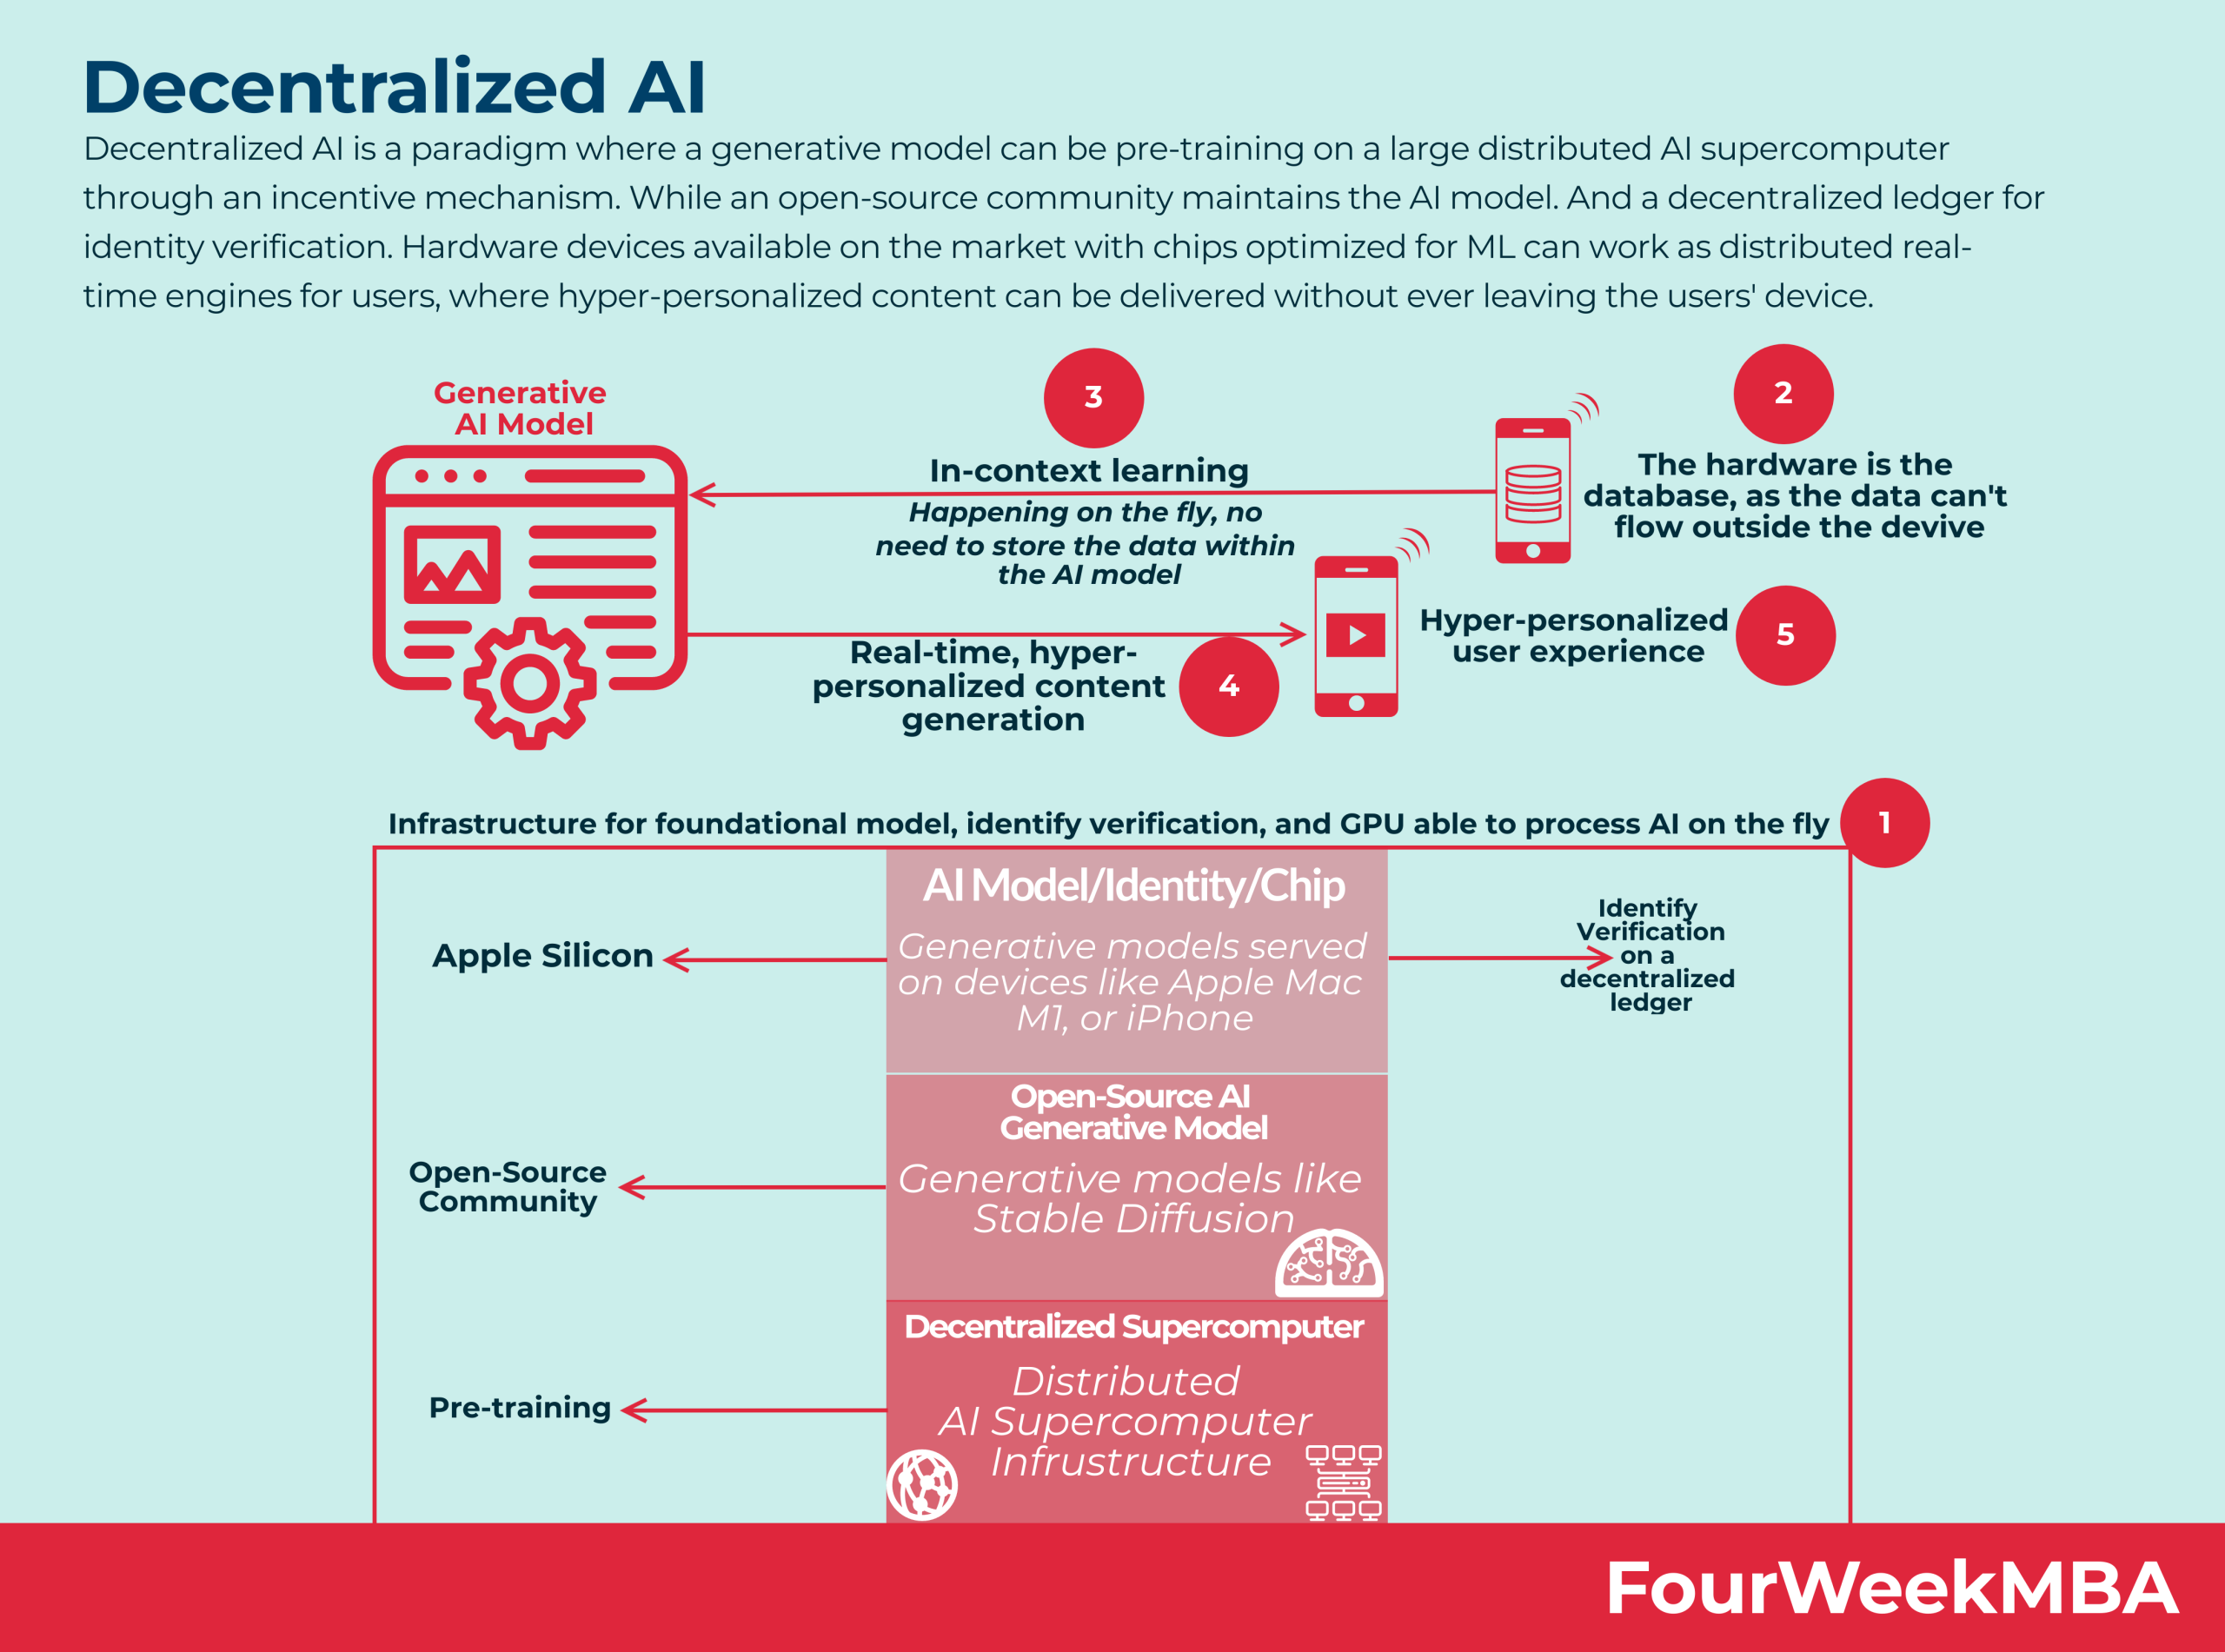 A Vision For Decentralized AI - FourWeekMBA